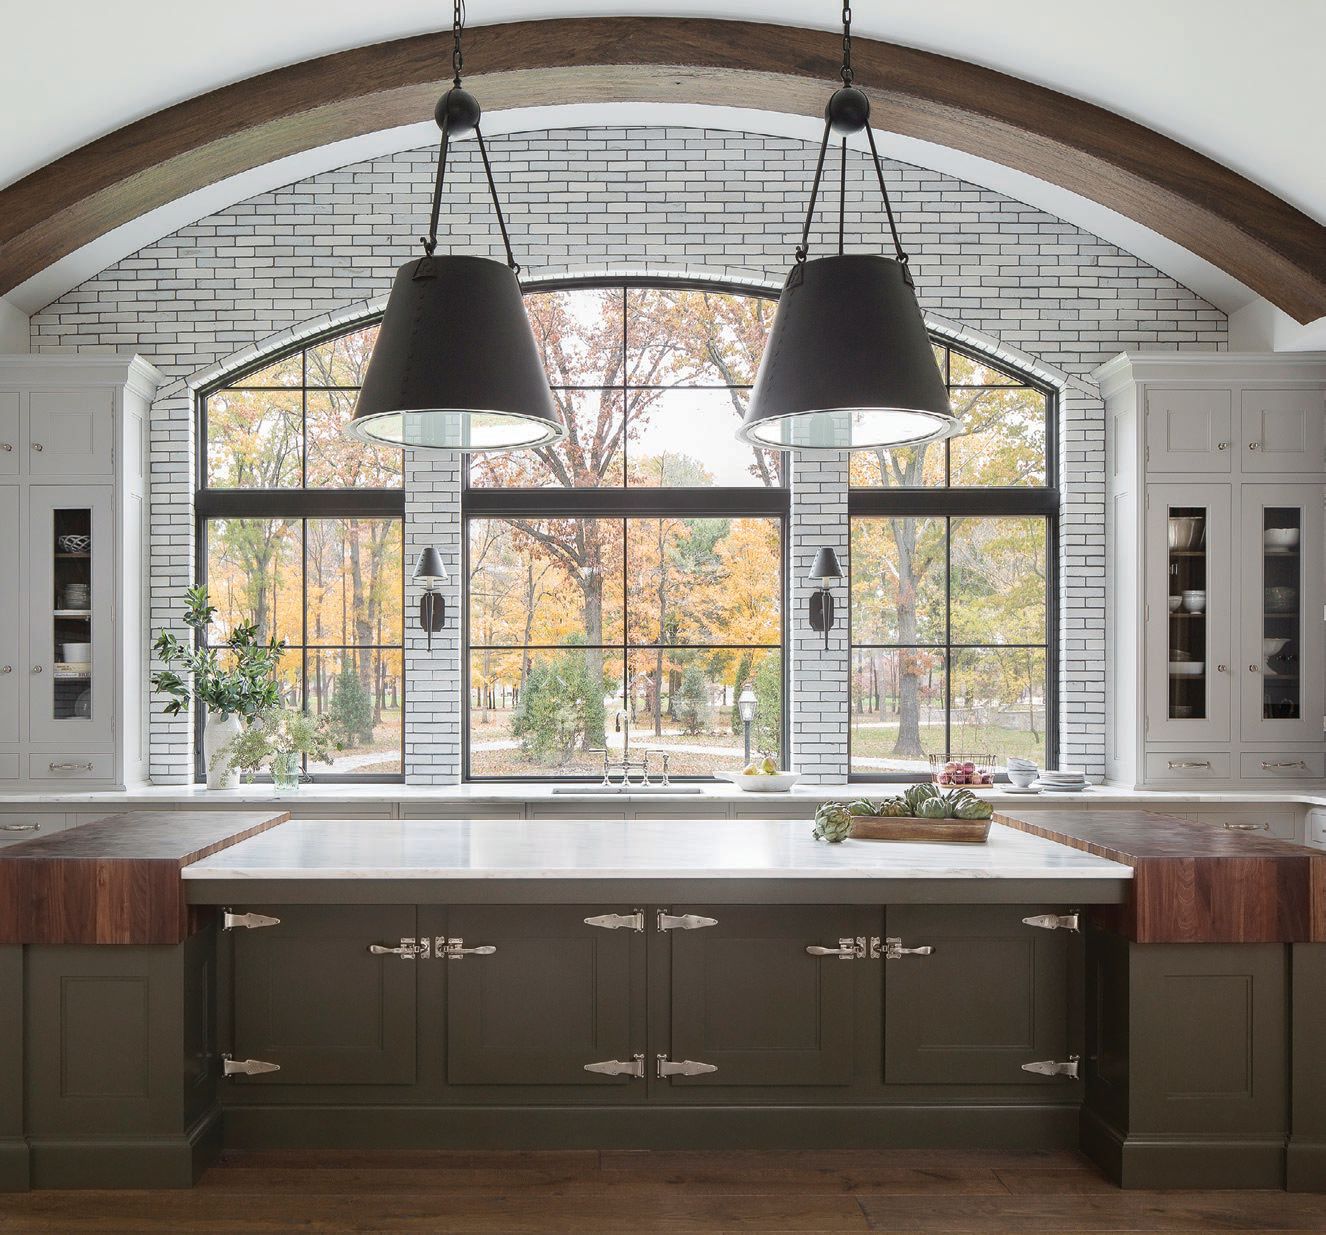 A Christopher Peacock kitchen is a standout moment in a stunning project by interior designer Jessie D. Miller CHRISTOPHER PEACOCK KITCHEN PHOTO BY MEGAN LORENZ